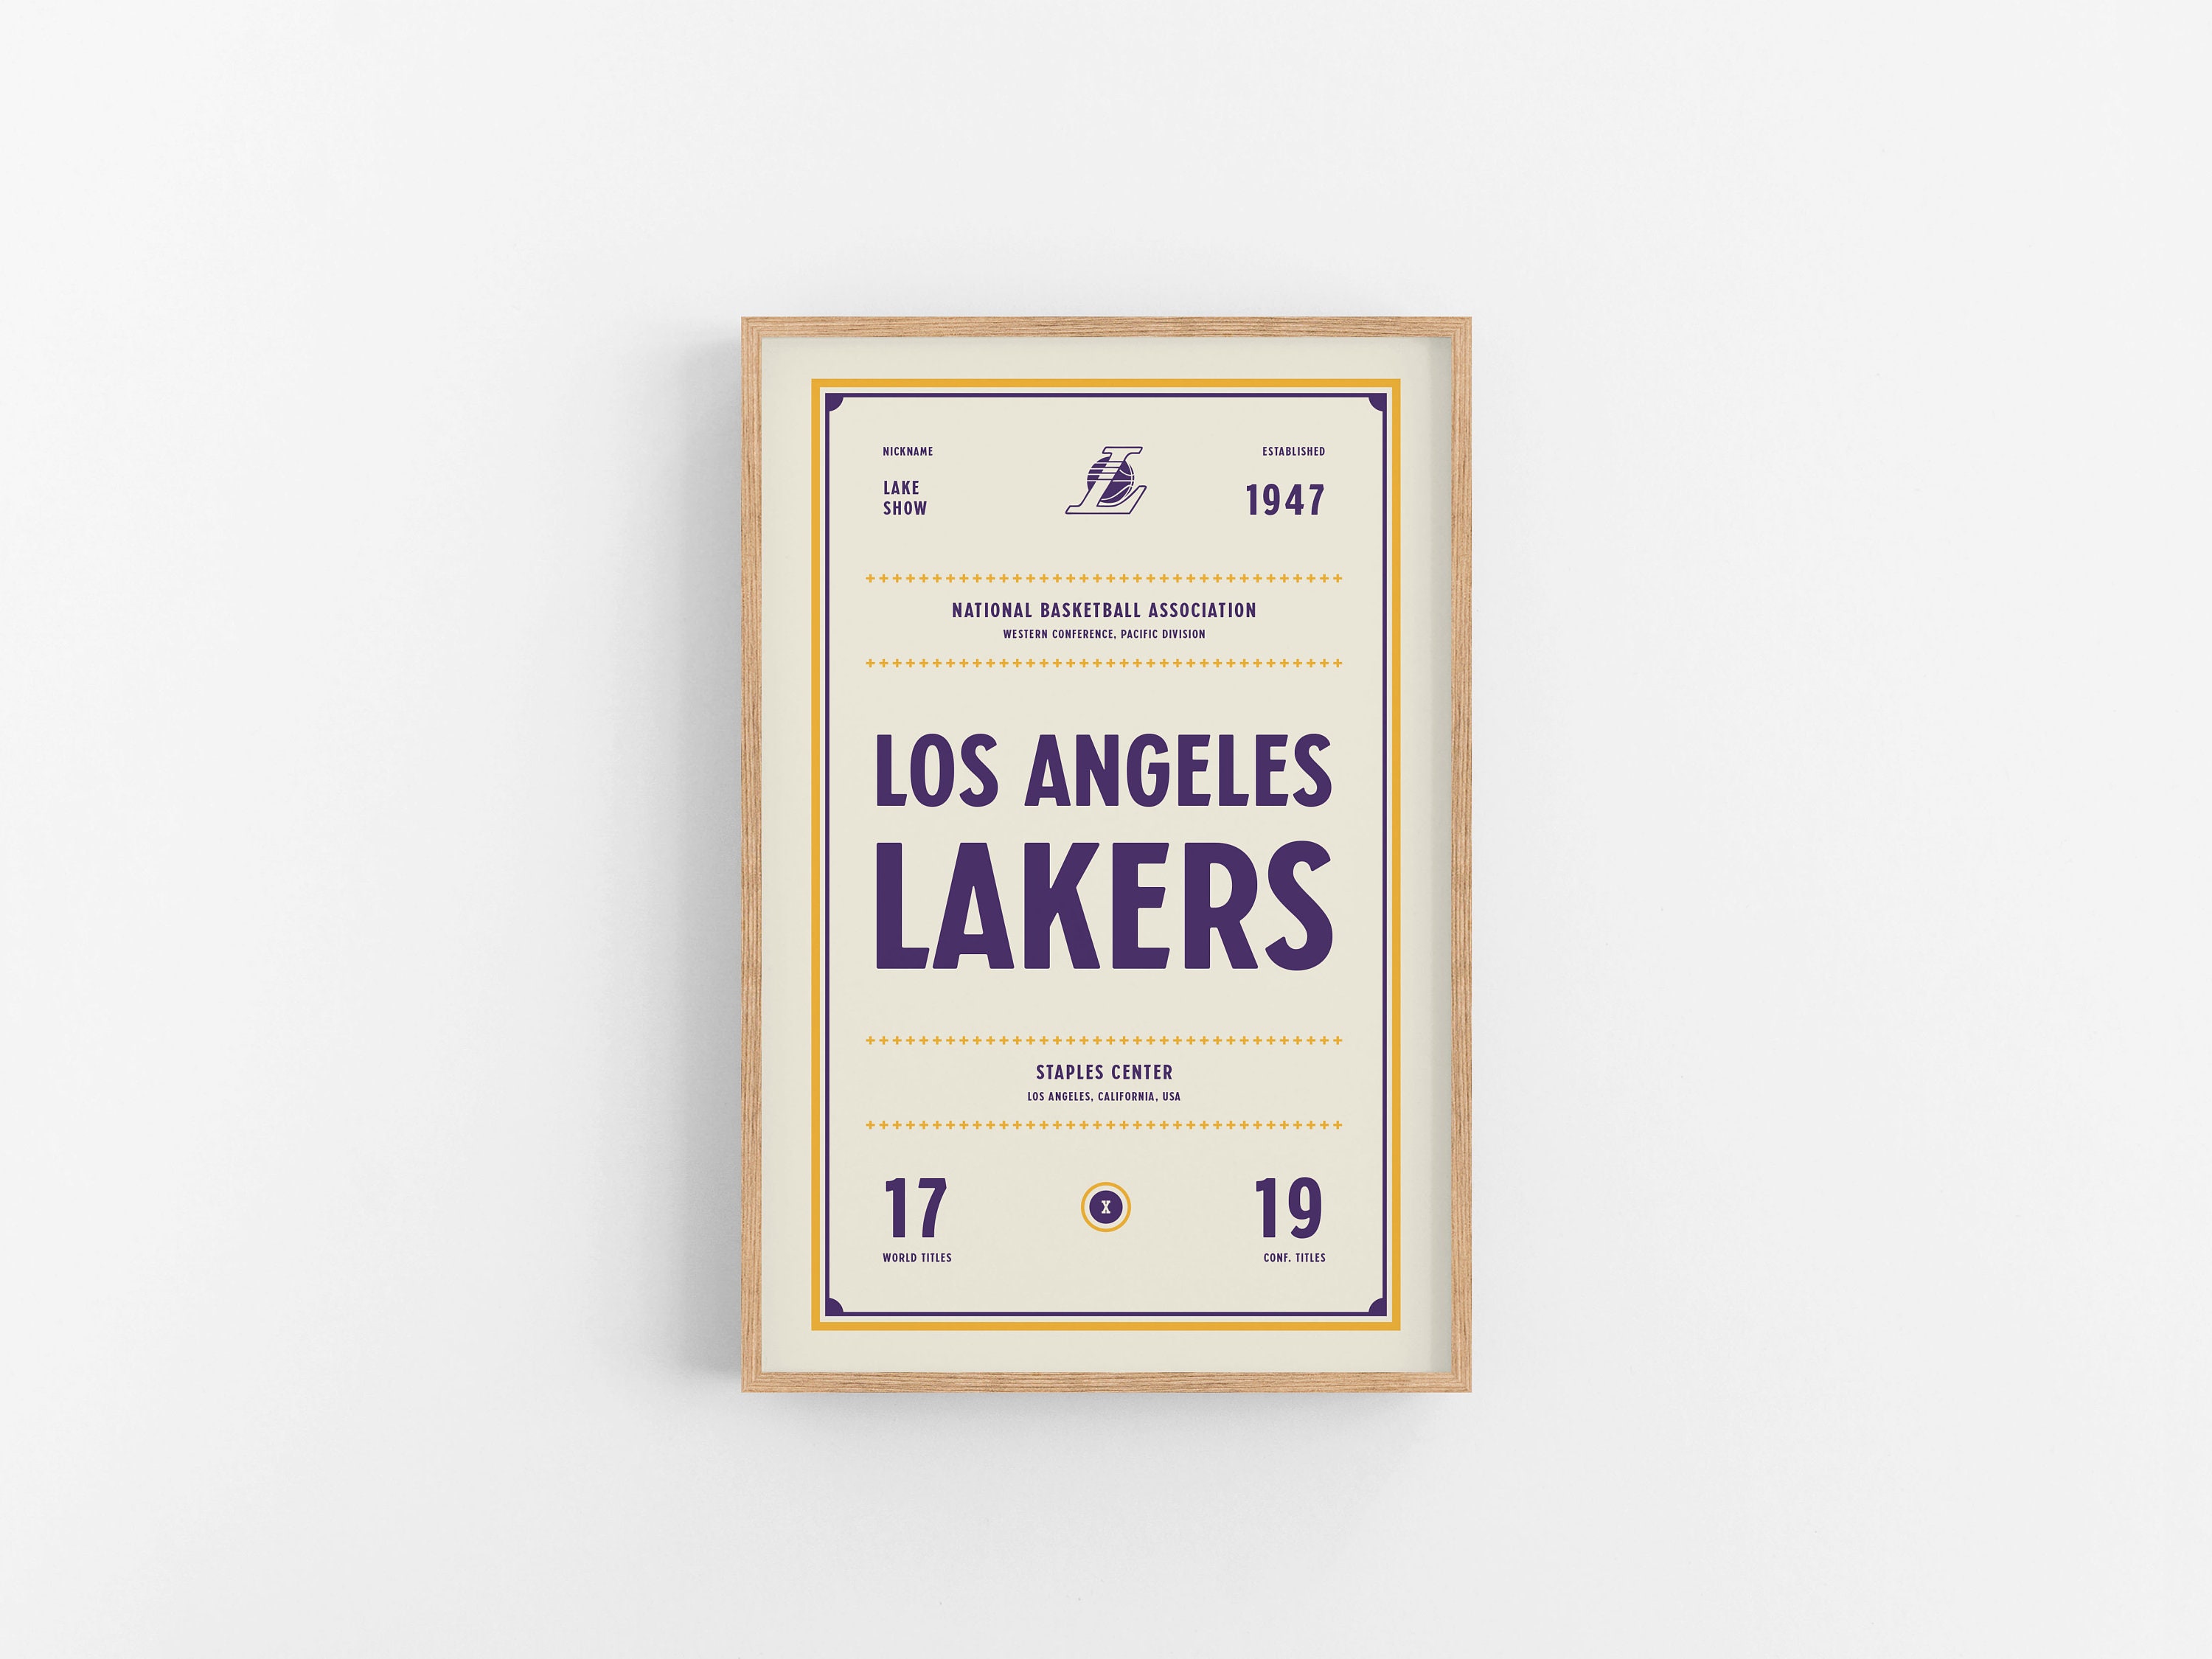 Los Angeles Lakers Last Staples Center Game Commemorative Lanyard &  Ticket Only